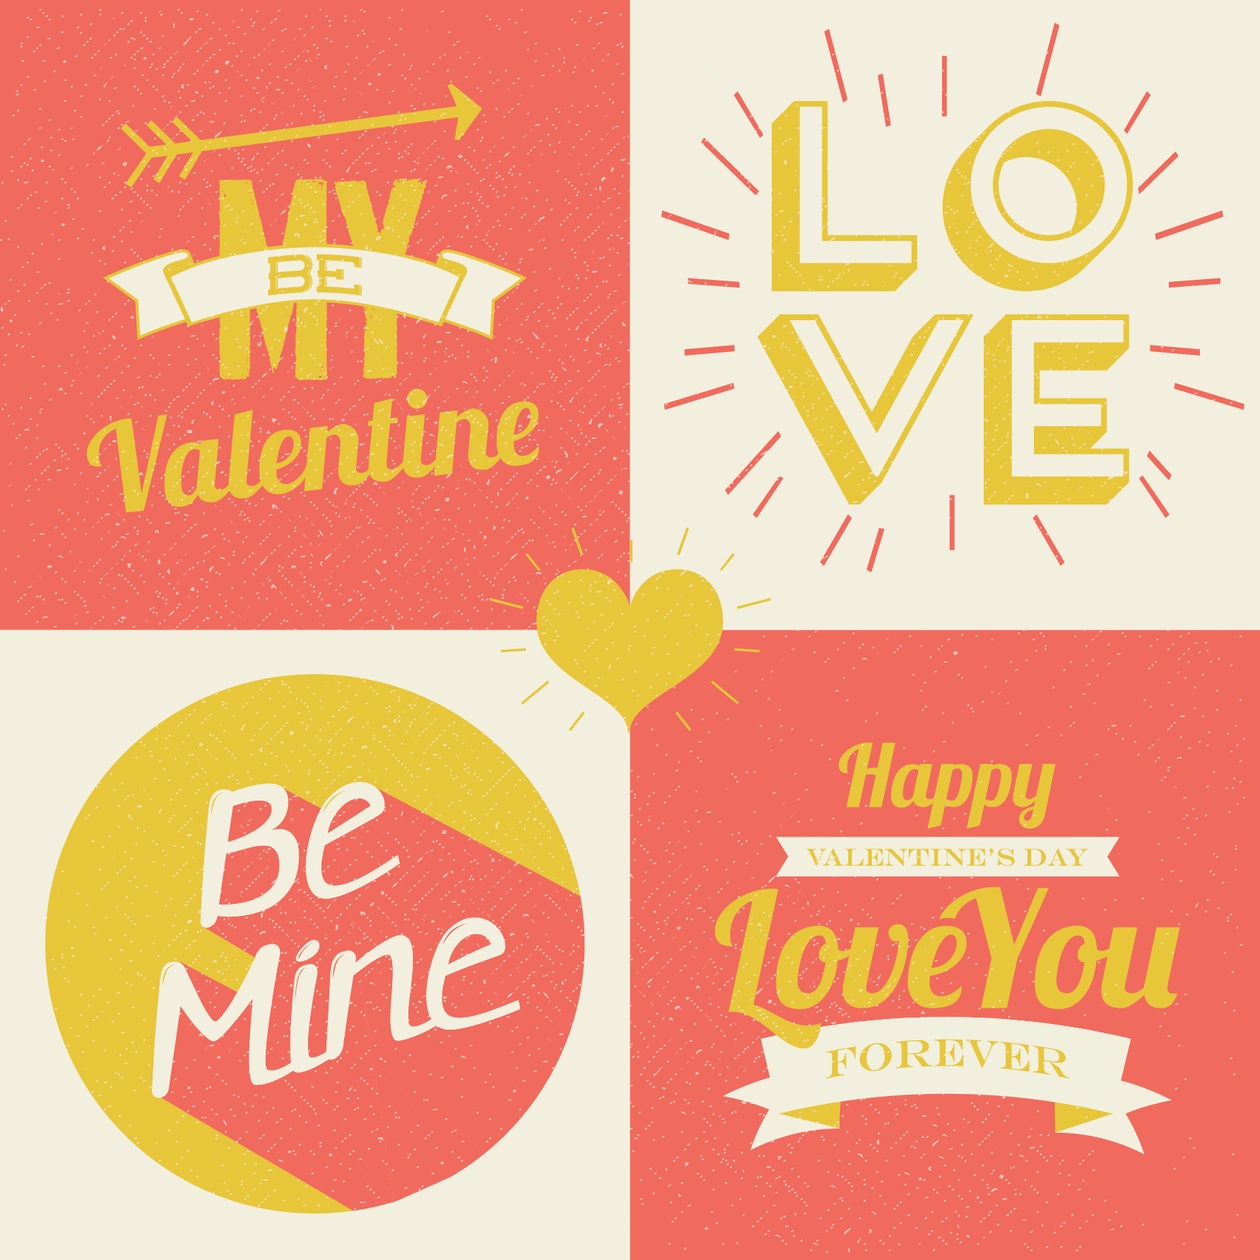 Valentines day illustrations and typography elements Photoshop brush